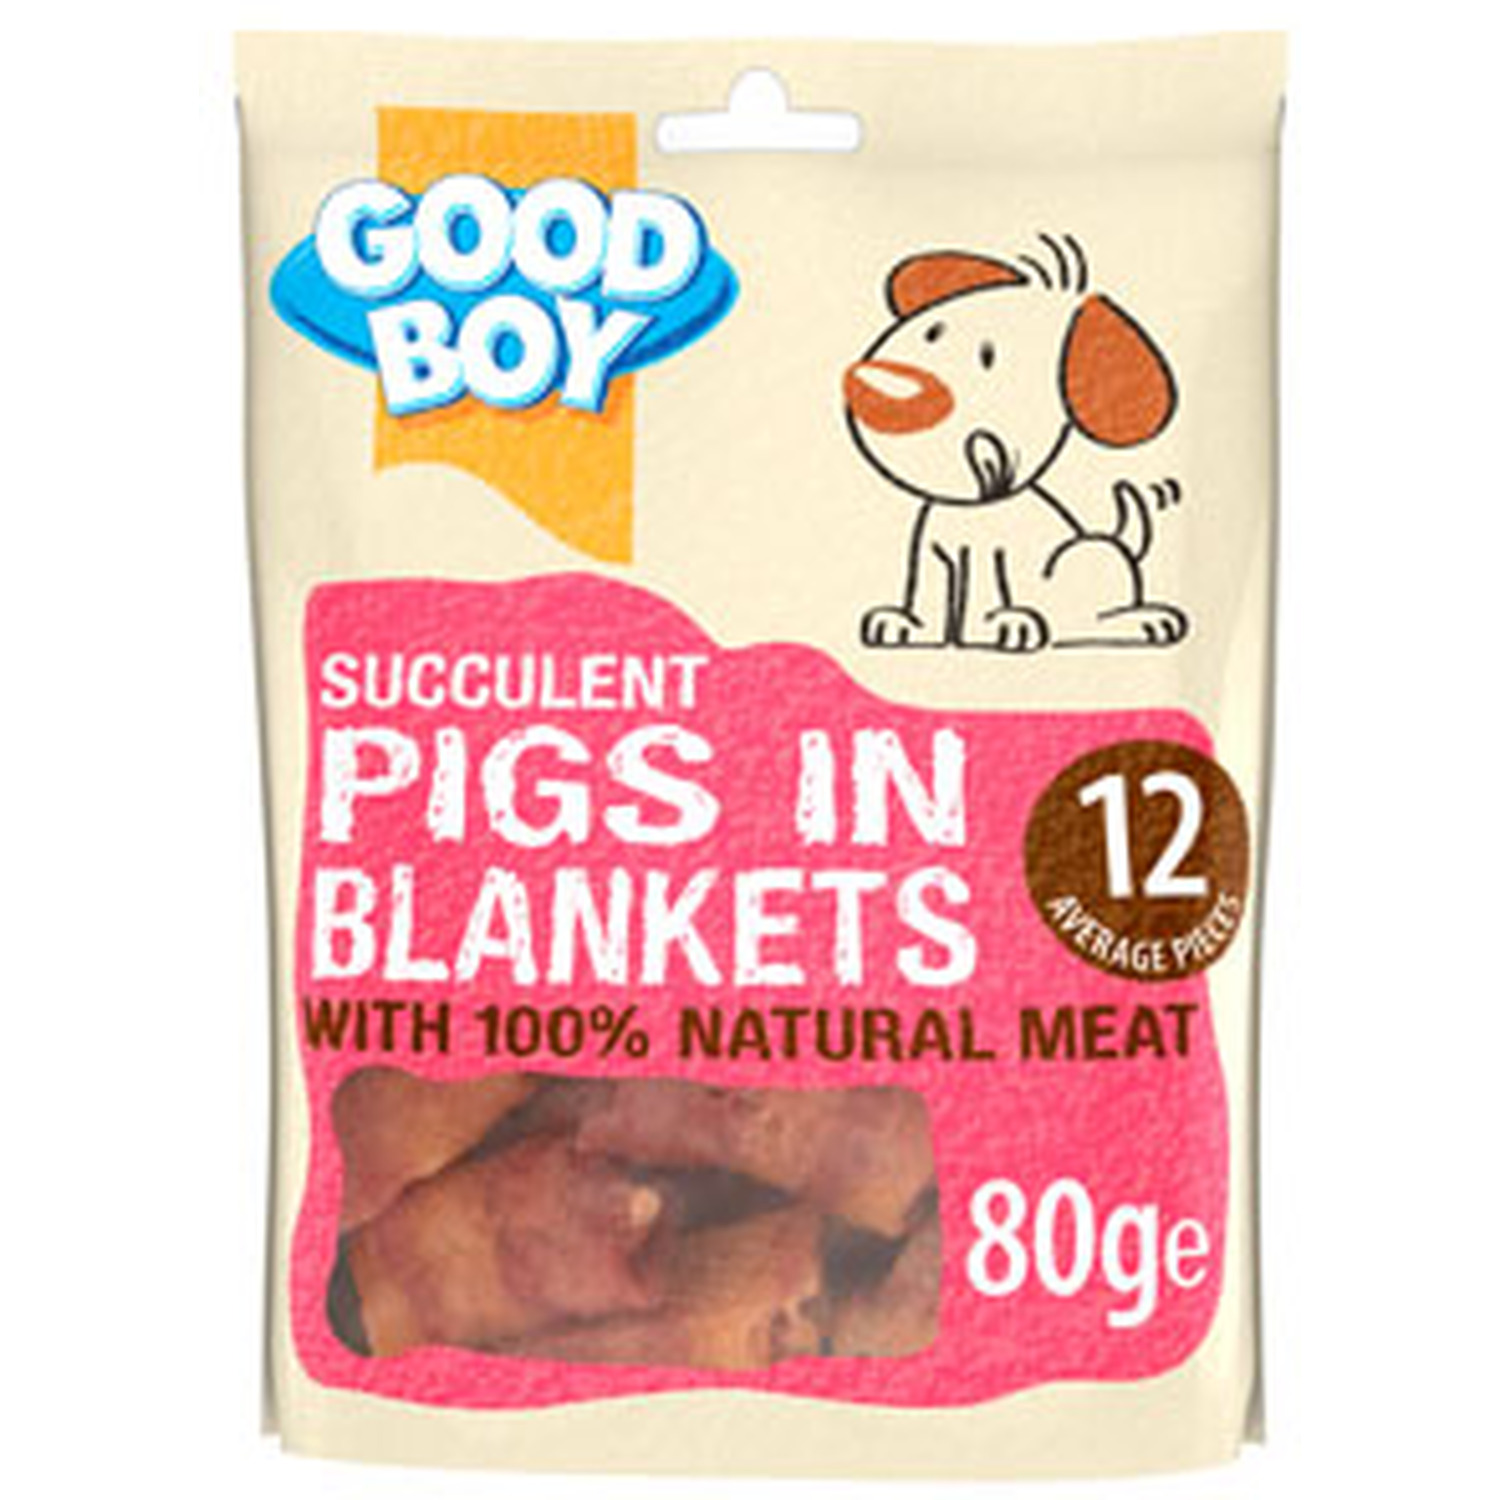 Good Boy Pawsley Succulent Pigs In Blankets Dog Treat 80g Image